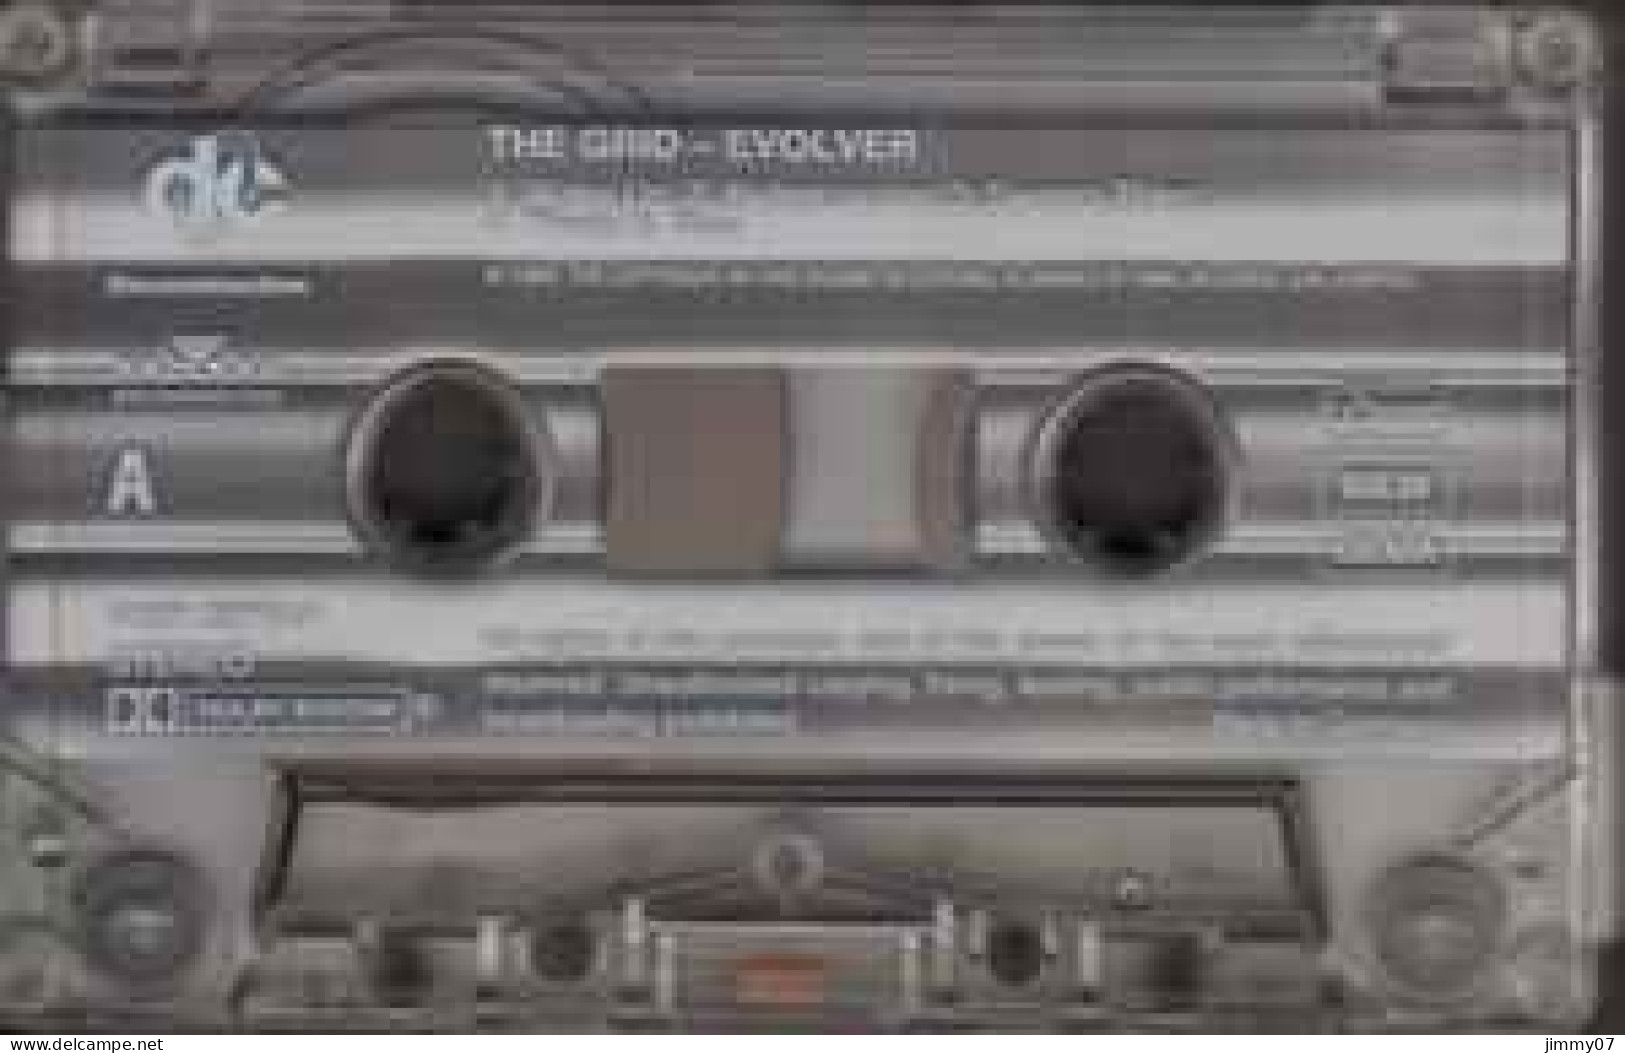 Grid - Evolver (Cass) - Audio Tapes